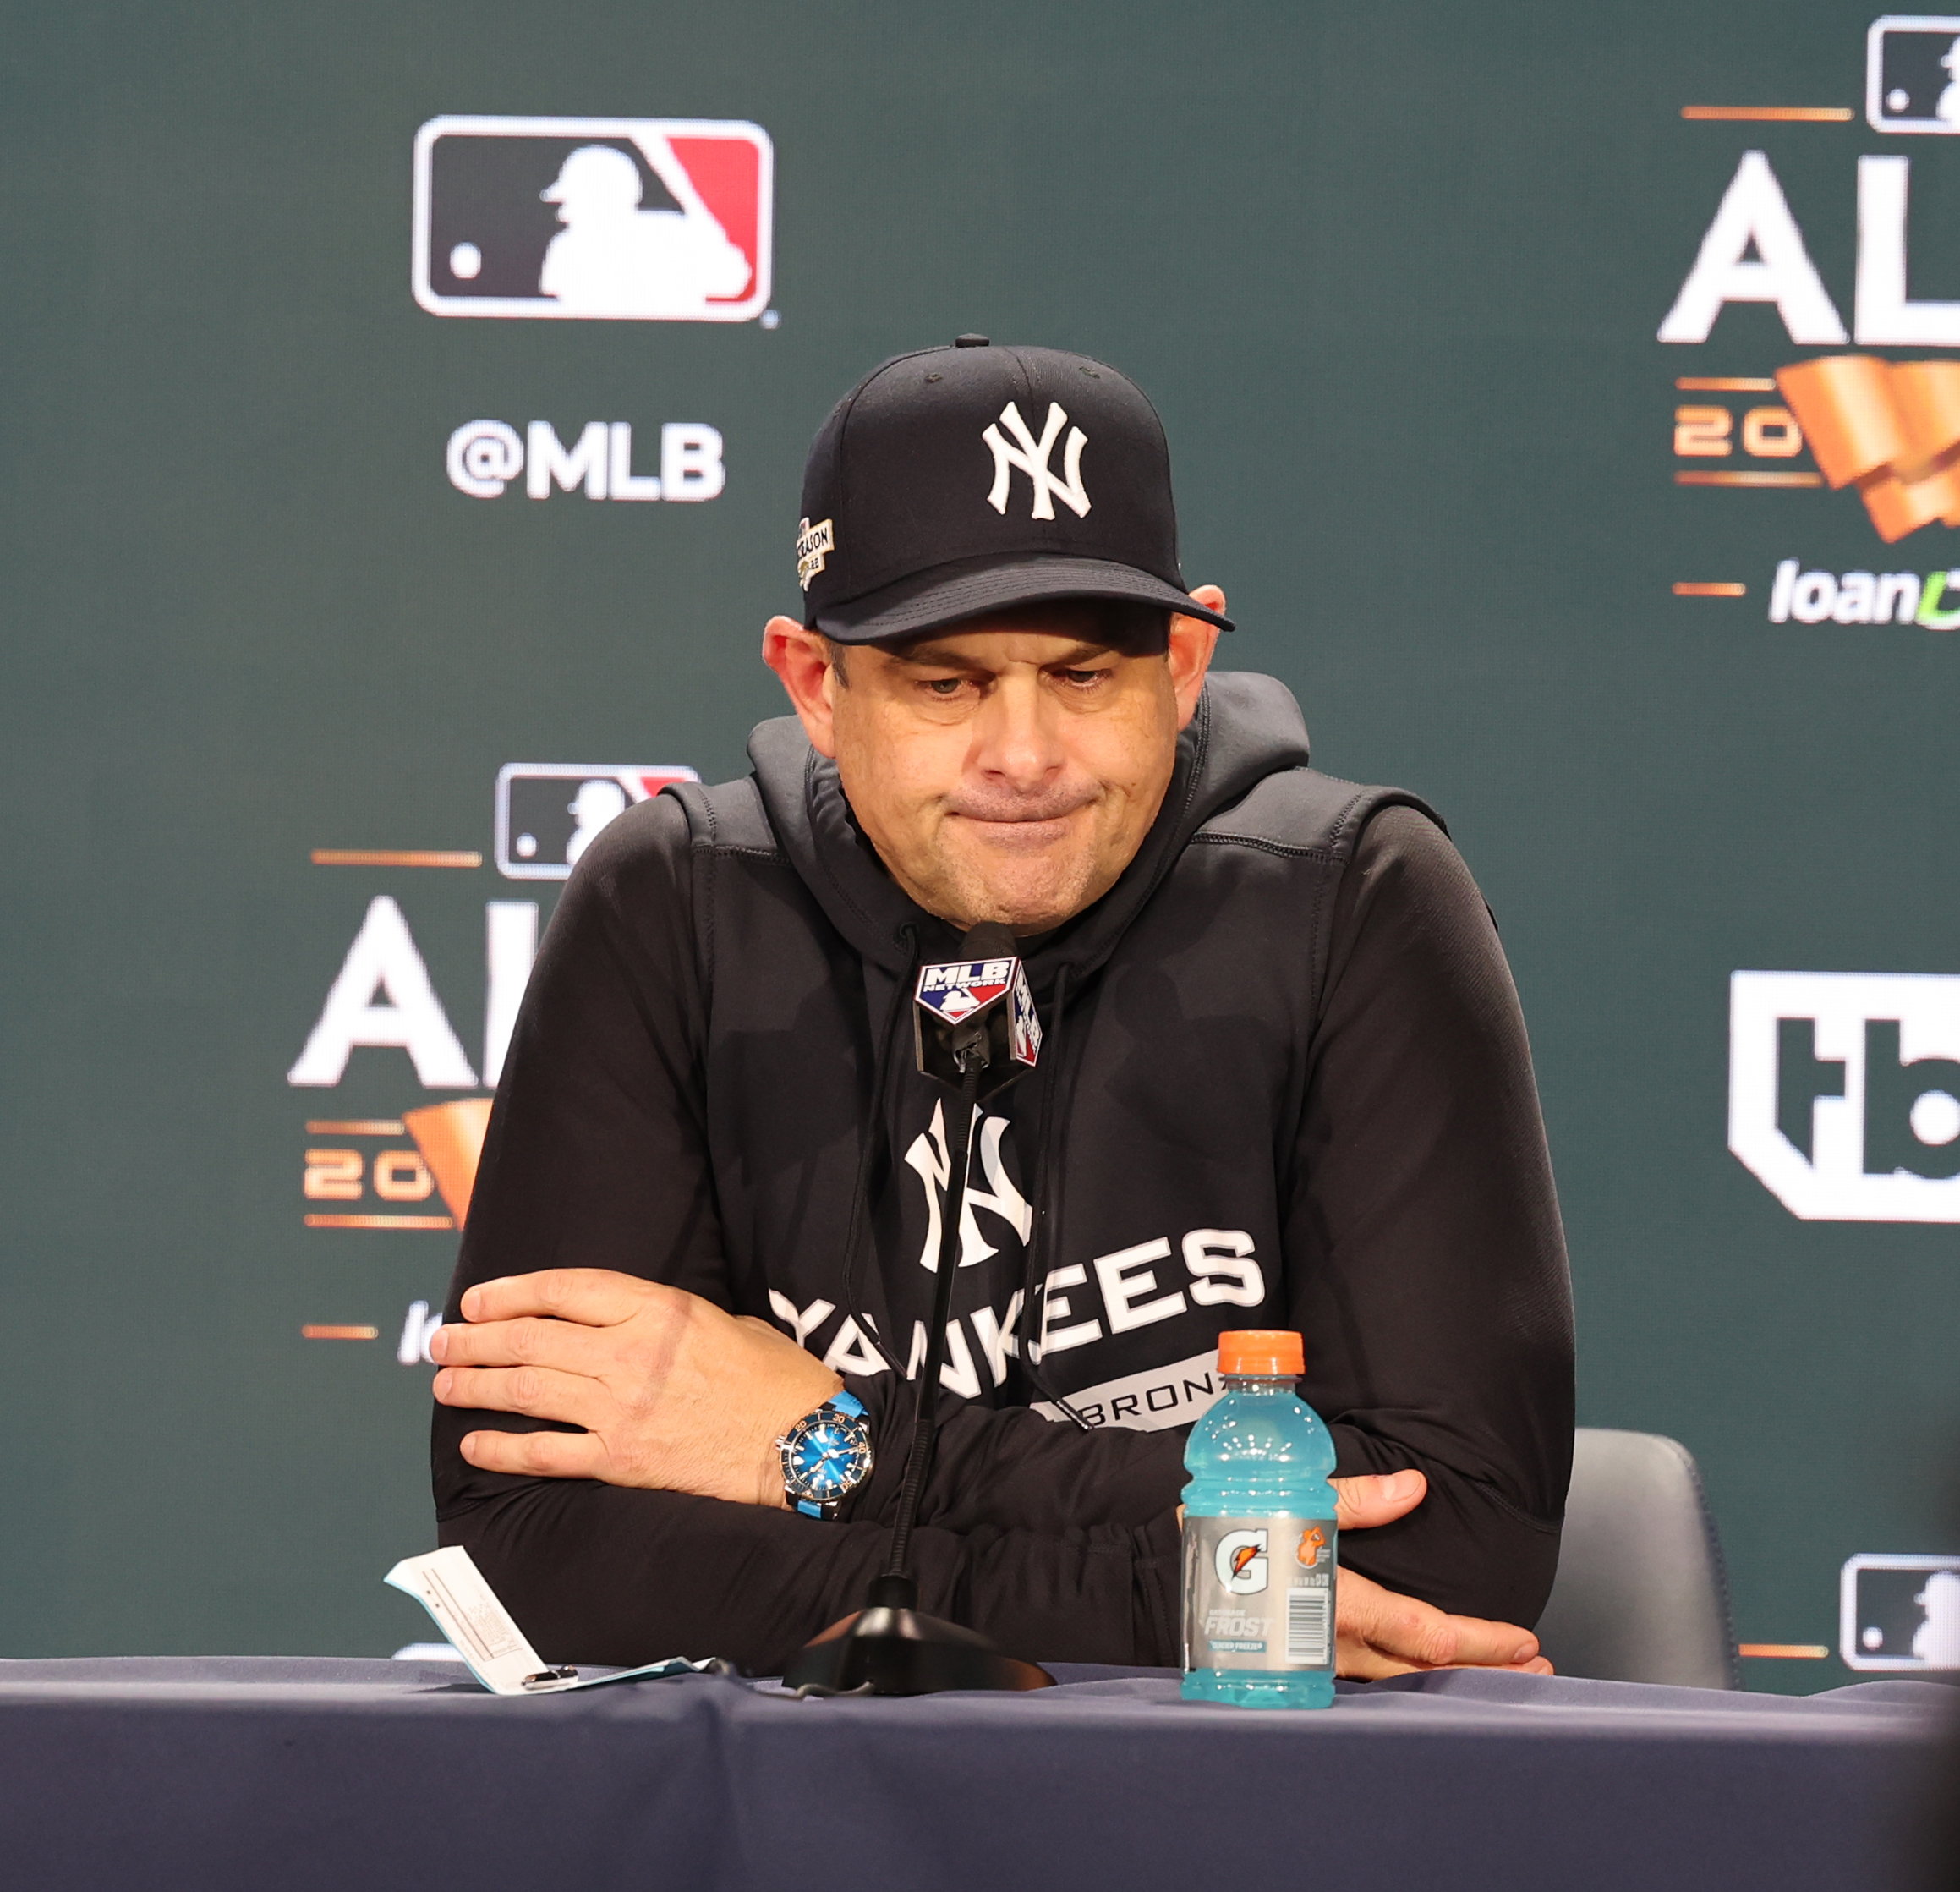 New York Yankees manager Aaron Boone speaks to media after the team is swept by Houston Astros in ALCS